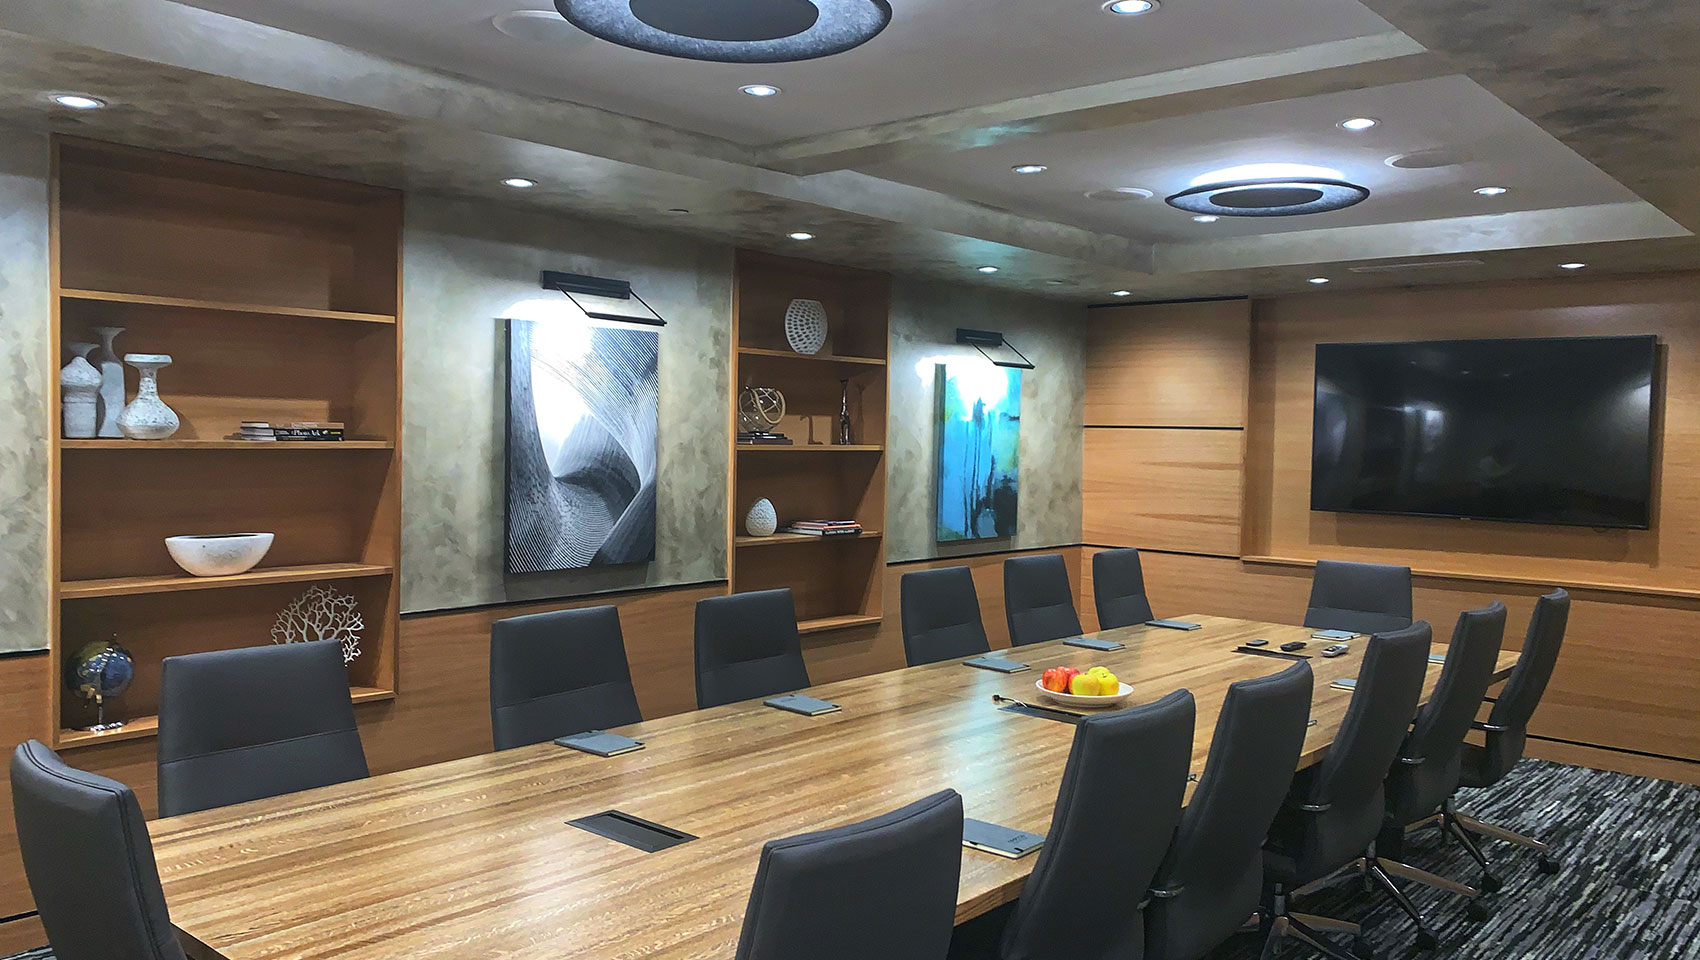 Ark Boardroom set up with conference style seating